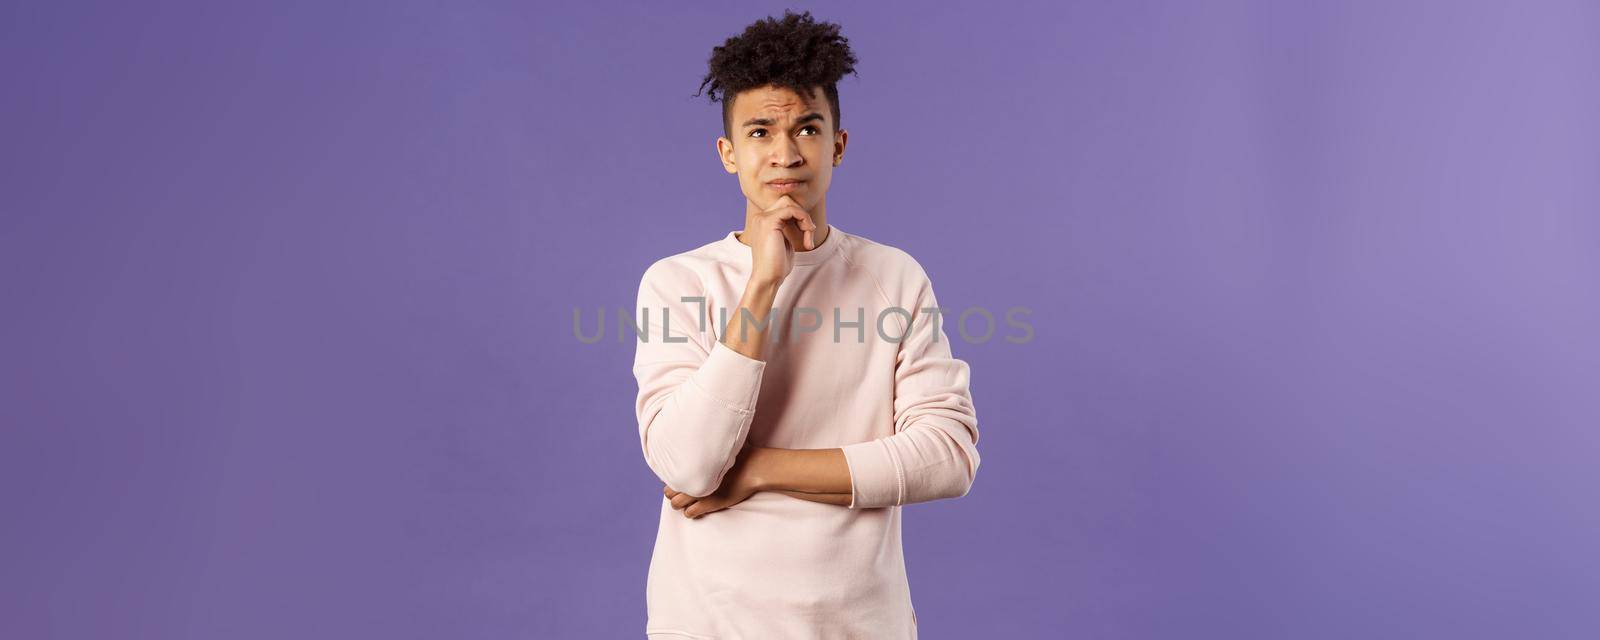 Portrait of complicated, young thoughtful man with dreads, look troubled up, thinking what to do, standing indecisive, grimacing not knowing answer, facing hard choices, purple background by Benzoix